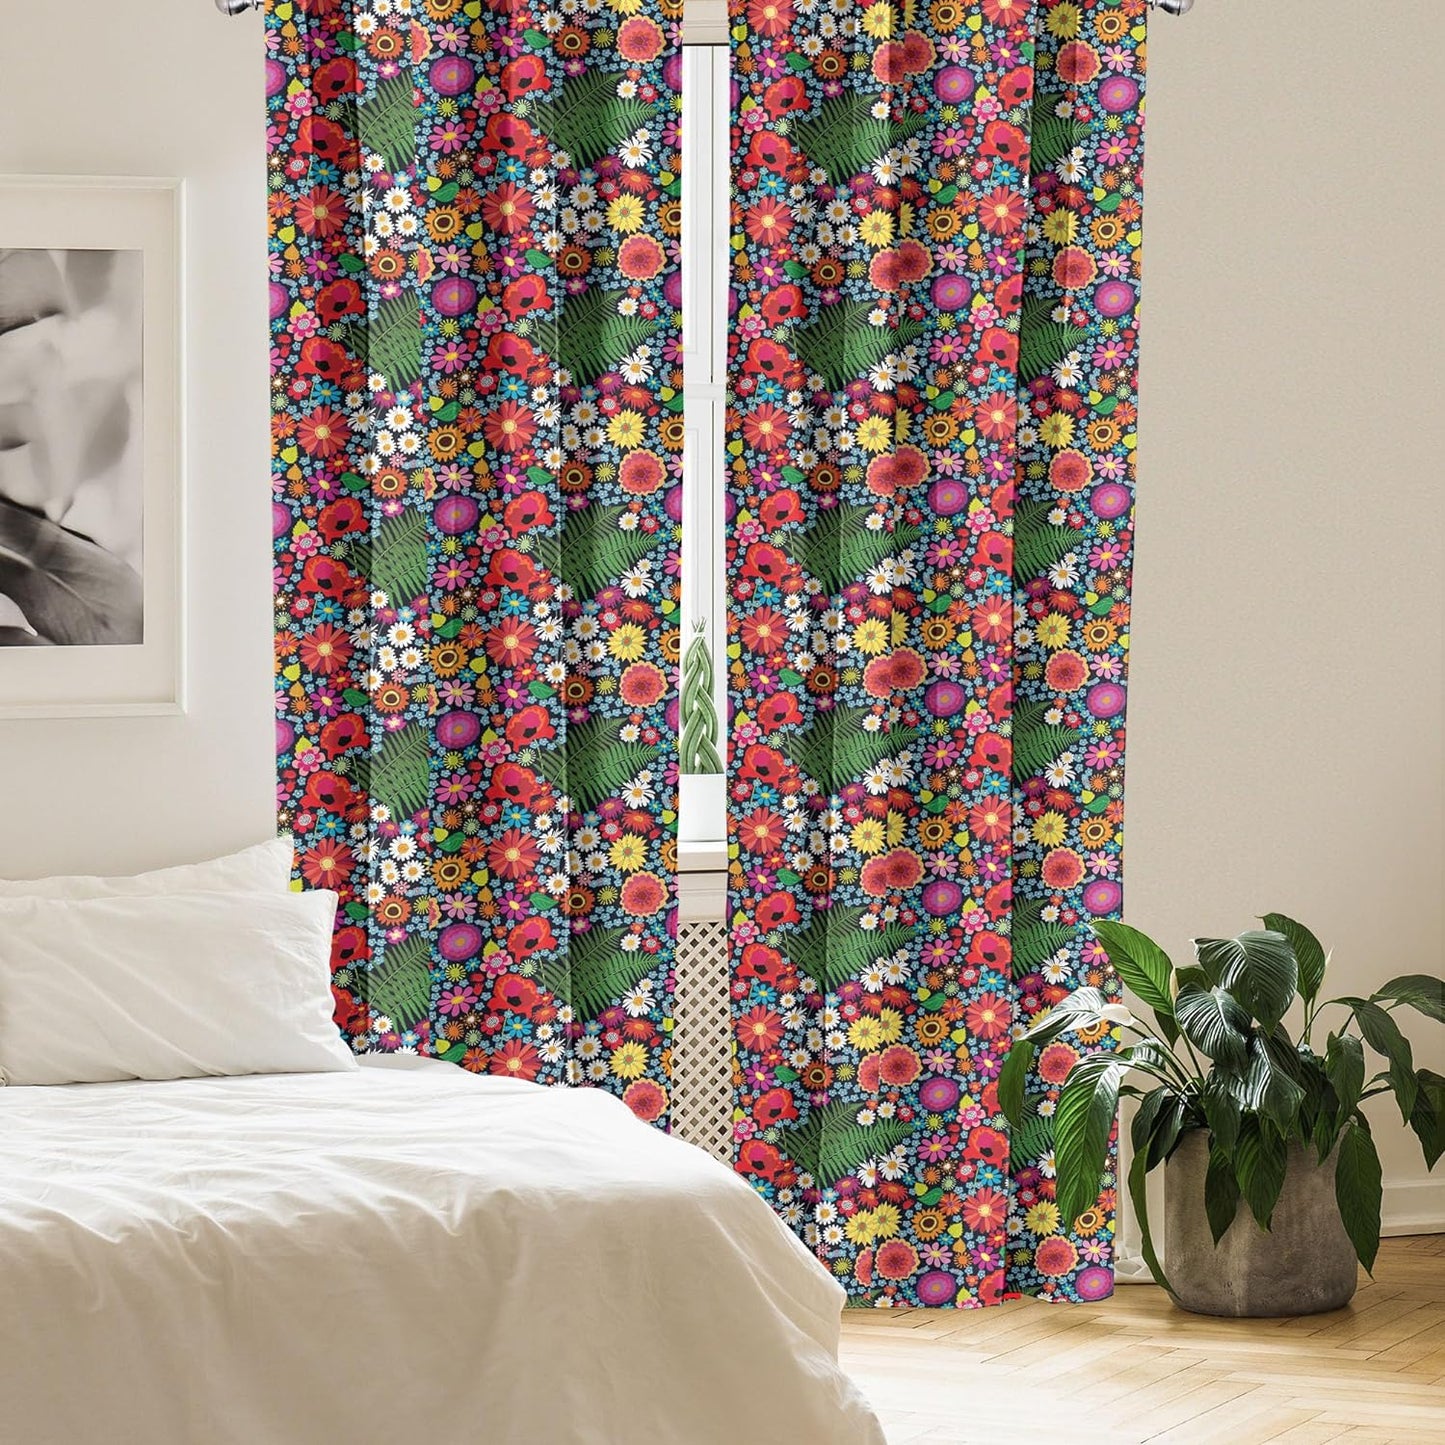 Ambesonne Floral 2 Panel Curtain Set, Colorful Spring Wildflowers Demonstration with Asters Chamomiles and Fern Leaves, Window Treatment Living Room Bedroom Decor, Pair of - 28" X 63", Green Magenta  Ambesonne   